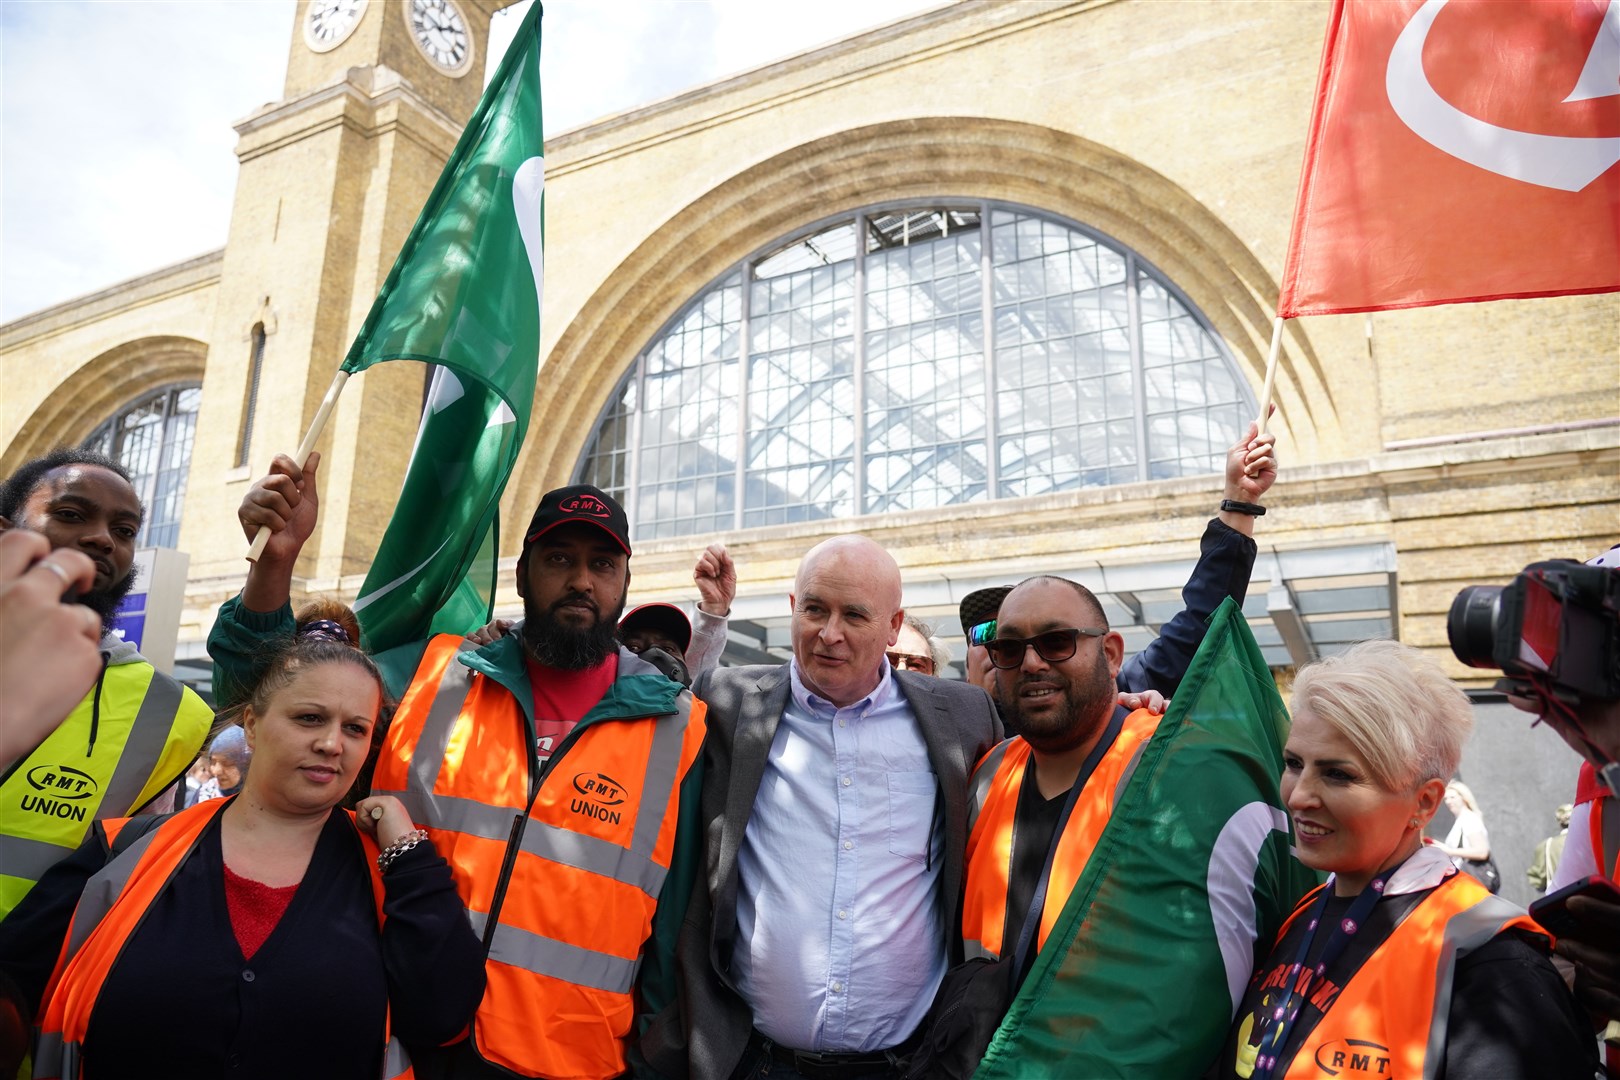 RMT general secretary Mick Lynch, centre, joined a rally outside King’s Cross Station in central London during previous strike action last month (PA)